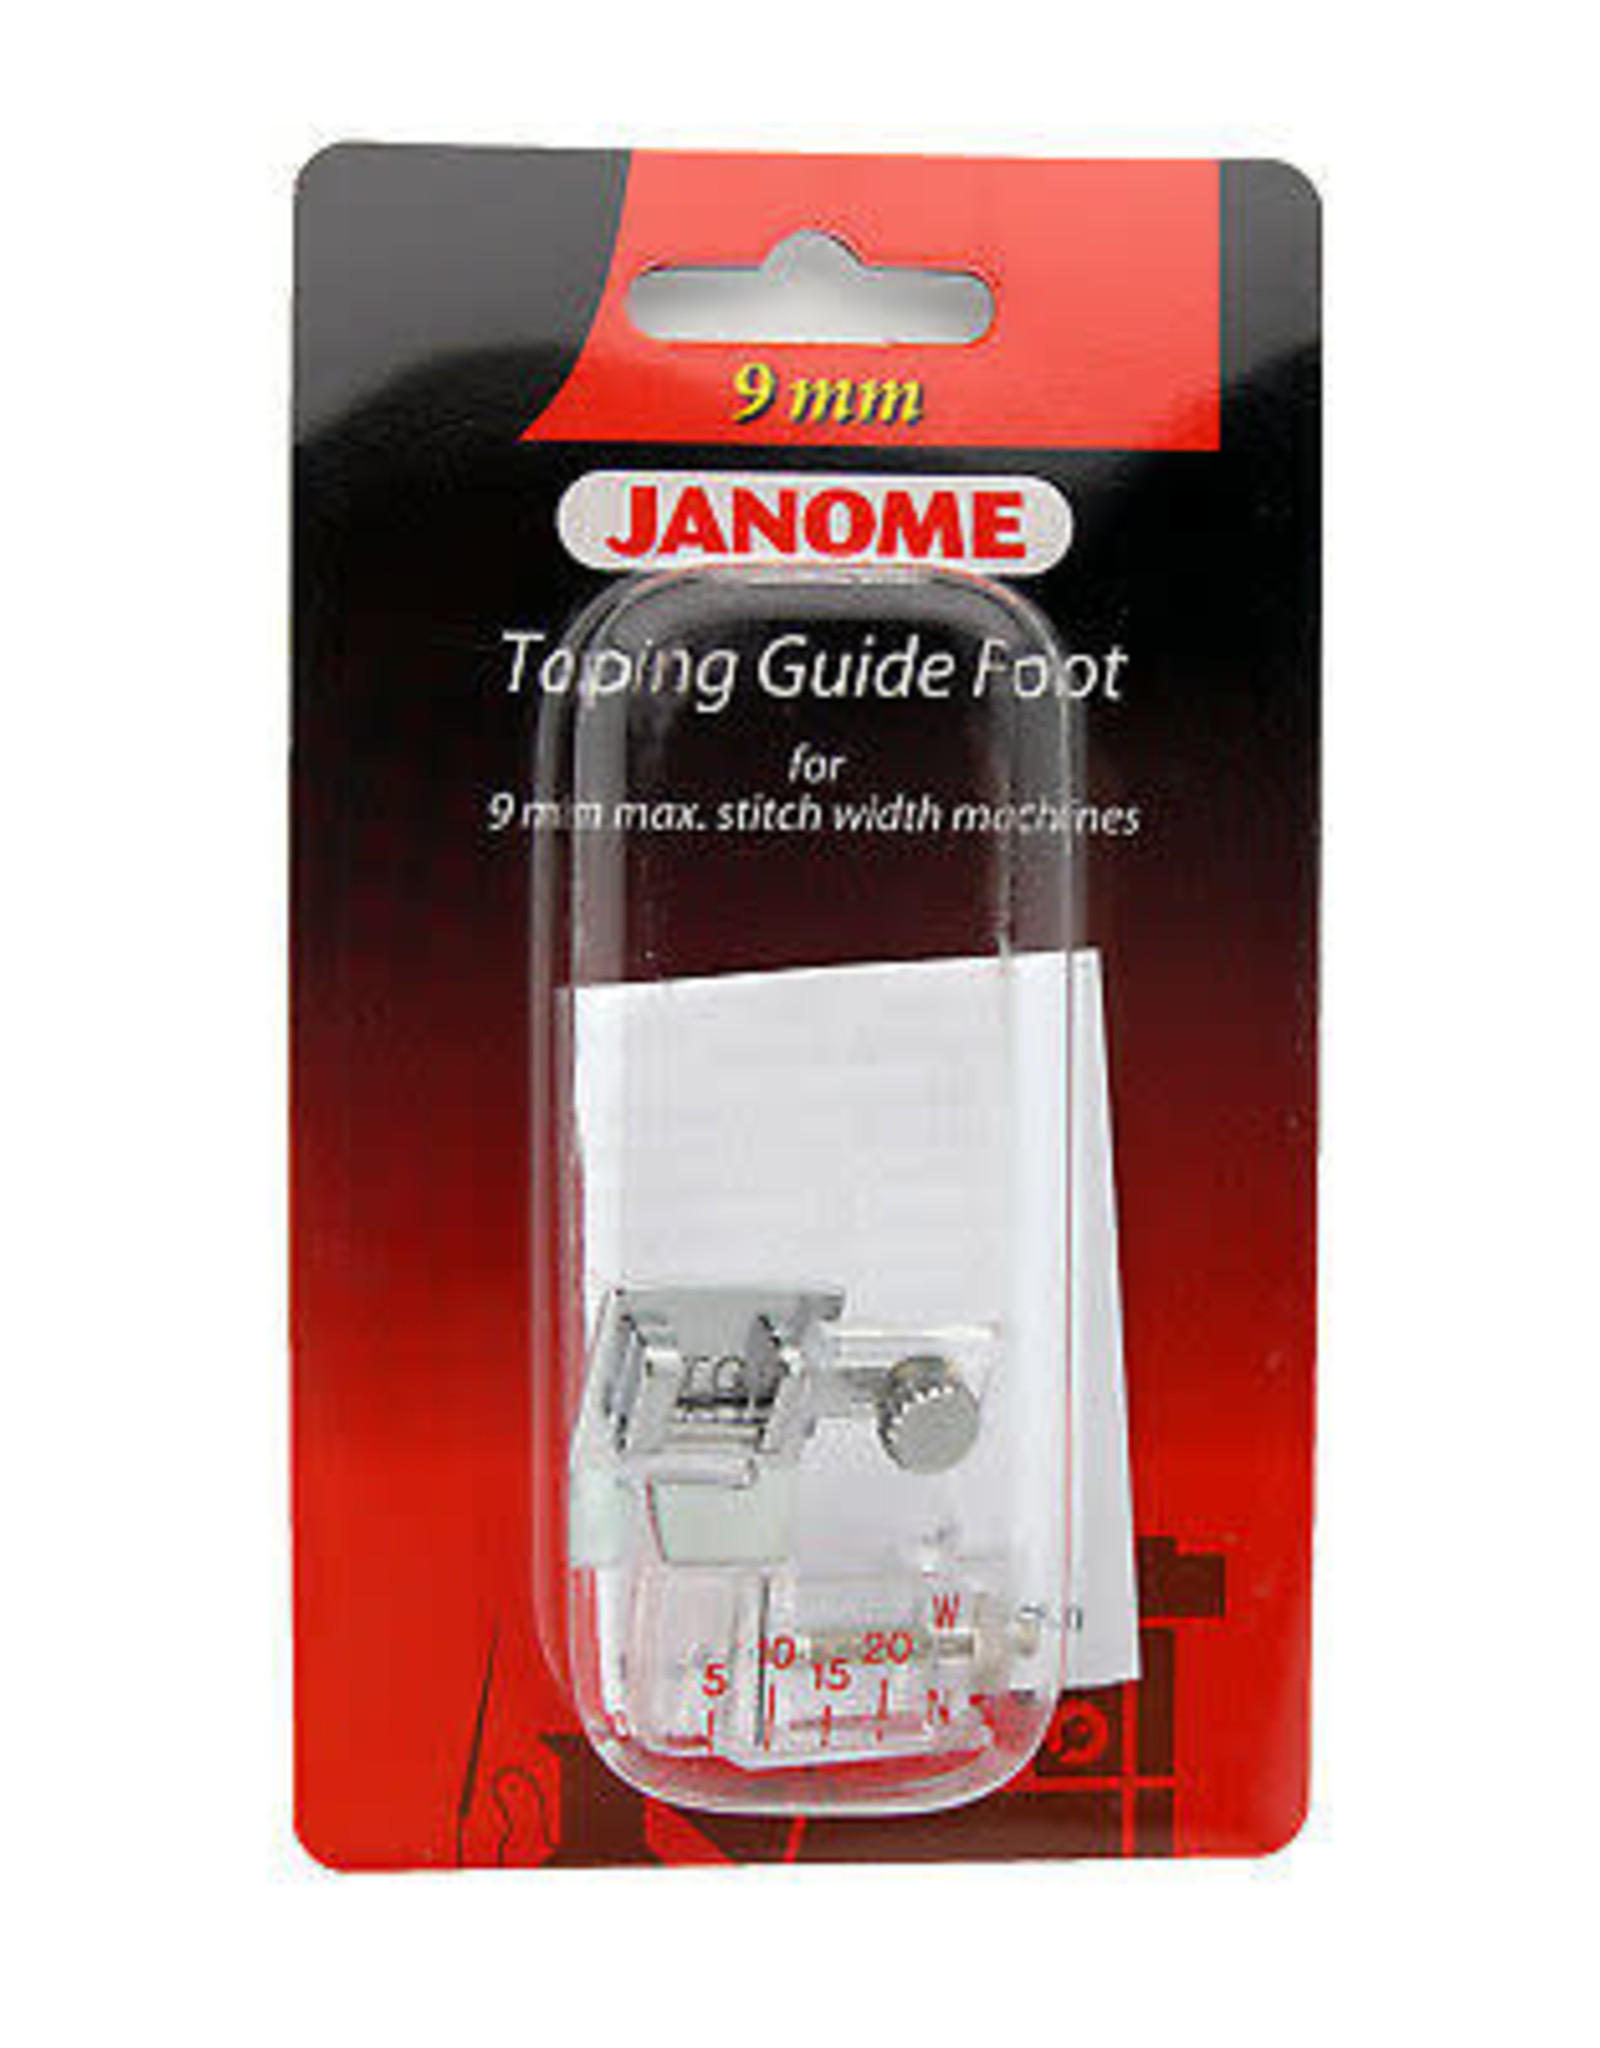 Janome Taping Guide Foot 9mm- 202310008